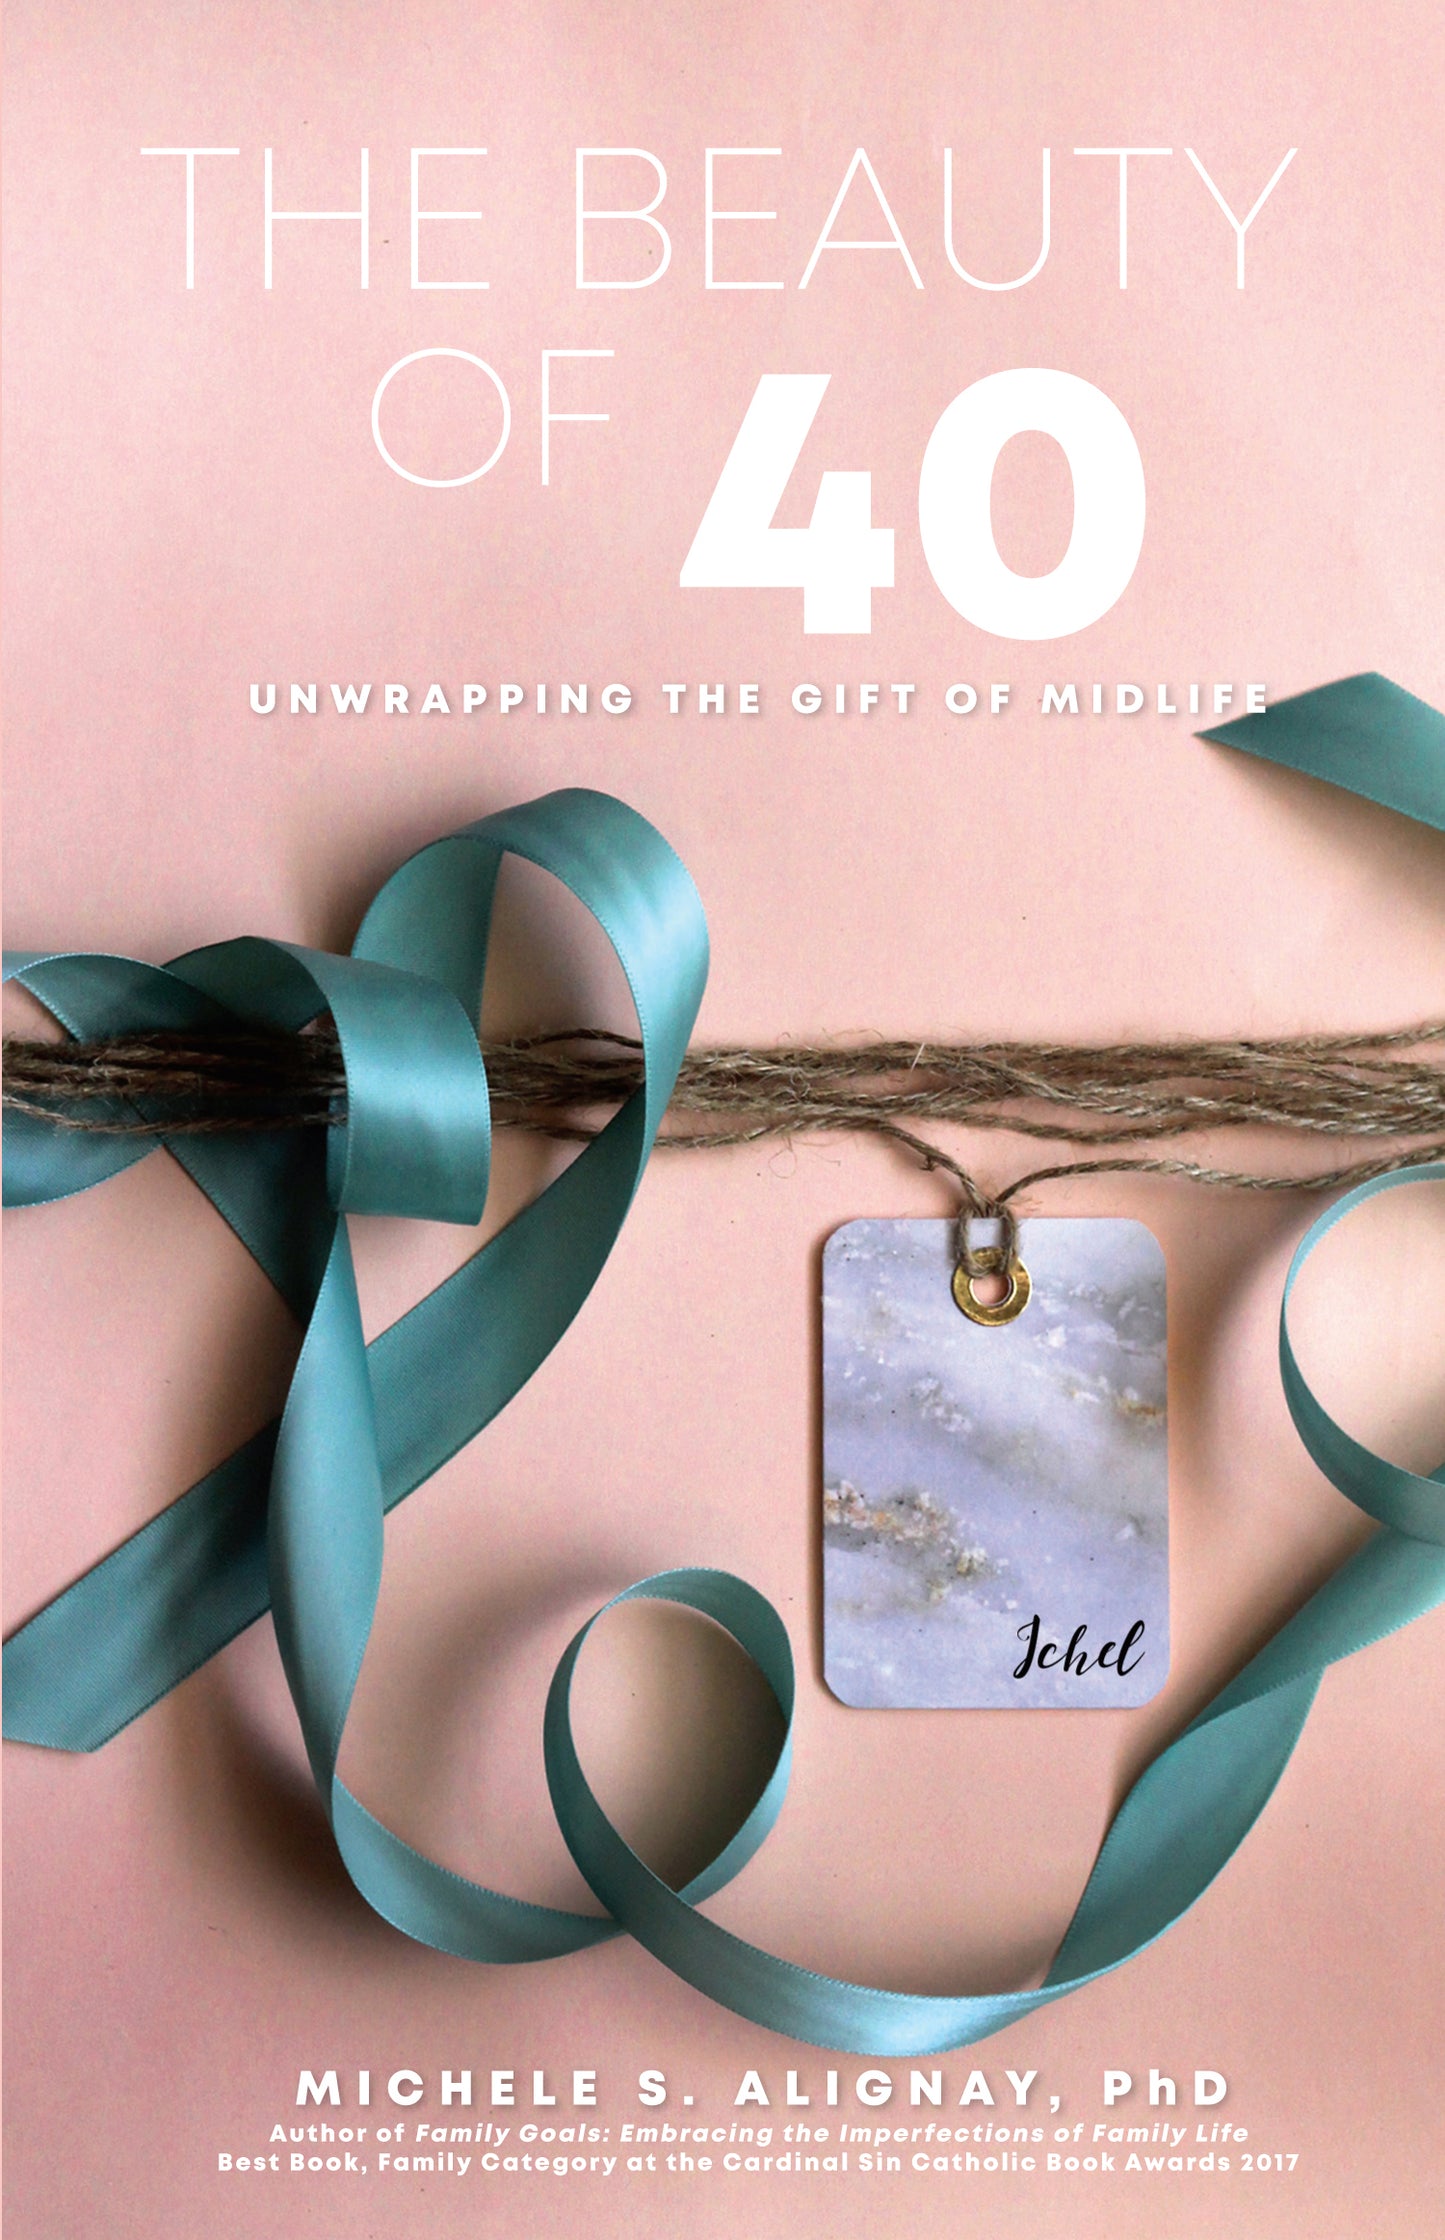 The Beauty of 40: Unwrapping the Gift of Midlife